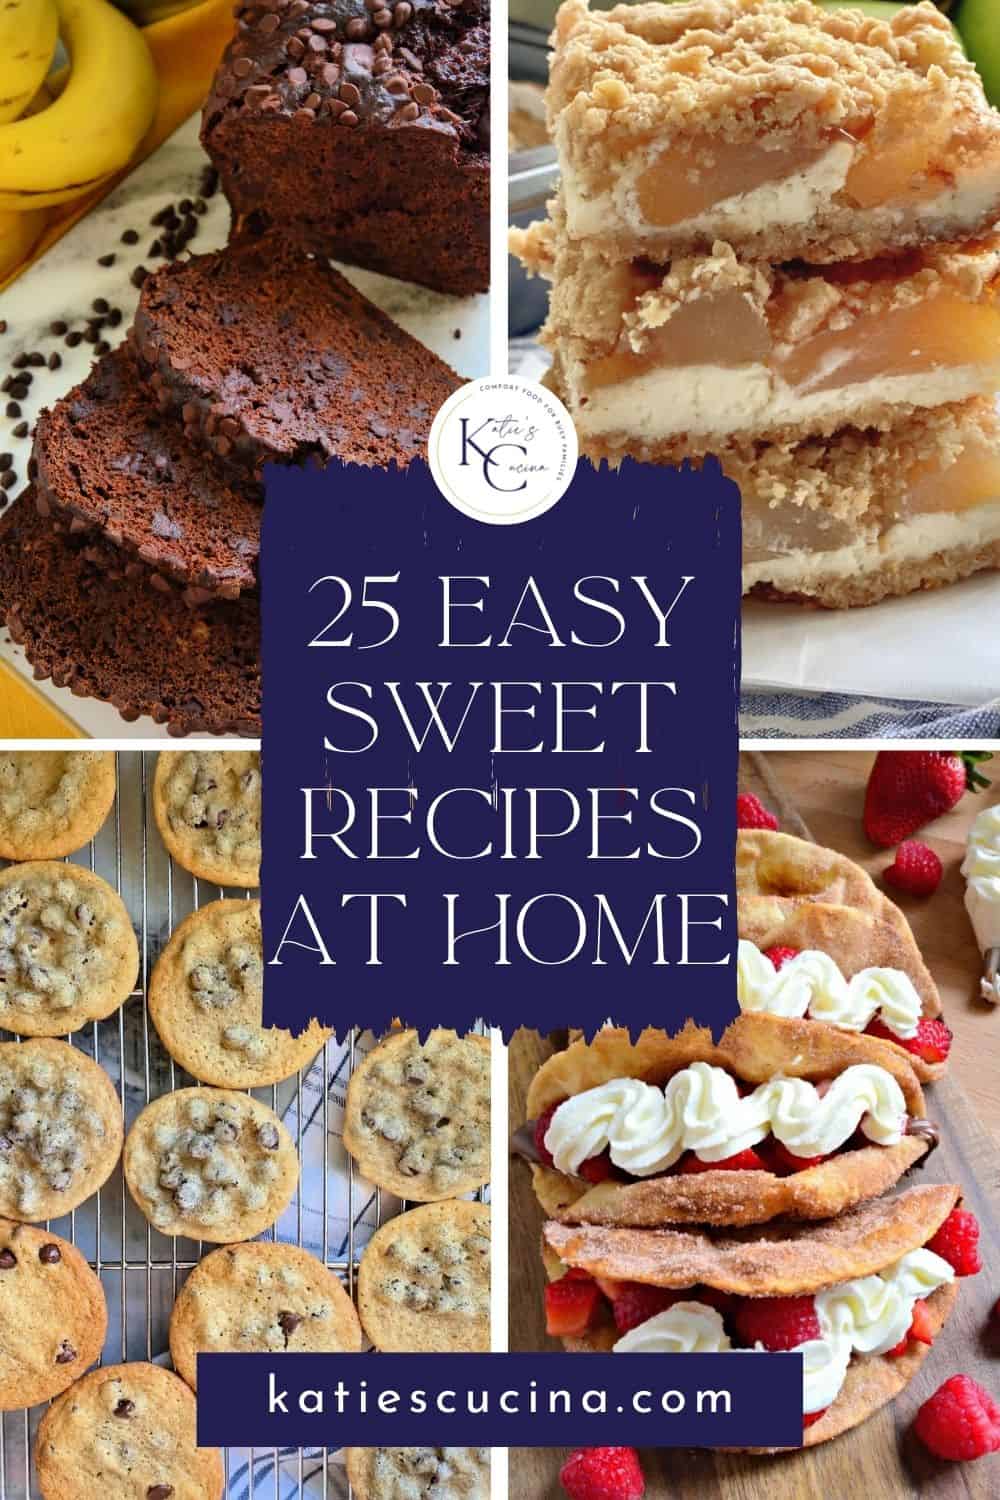 four photos; banana bread, cheesecake bars, dessert tacos, and cookies with recipe round up title on text for Pinterest.